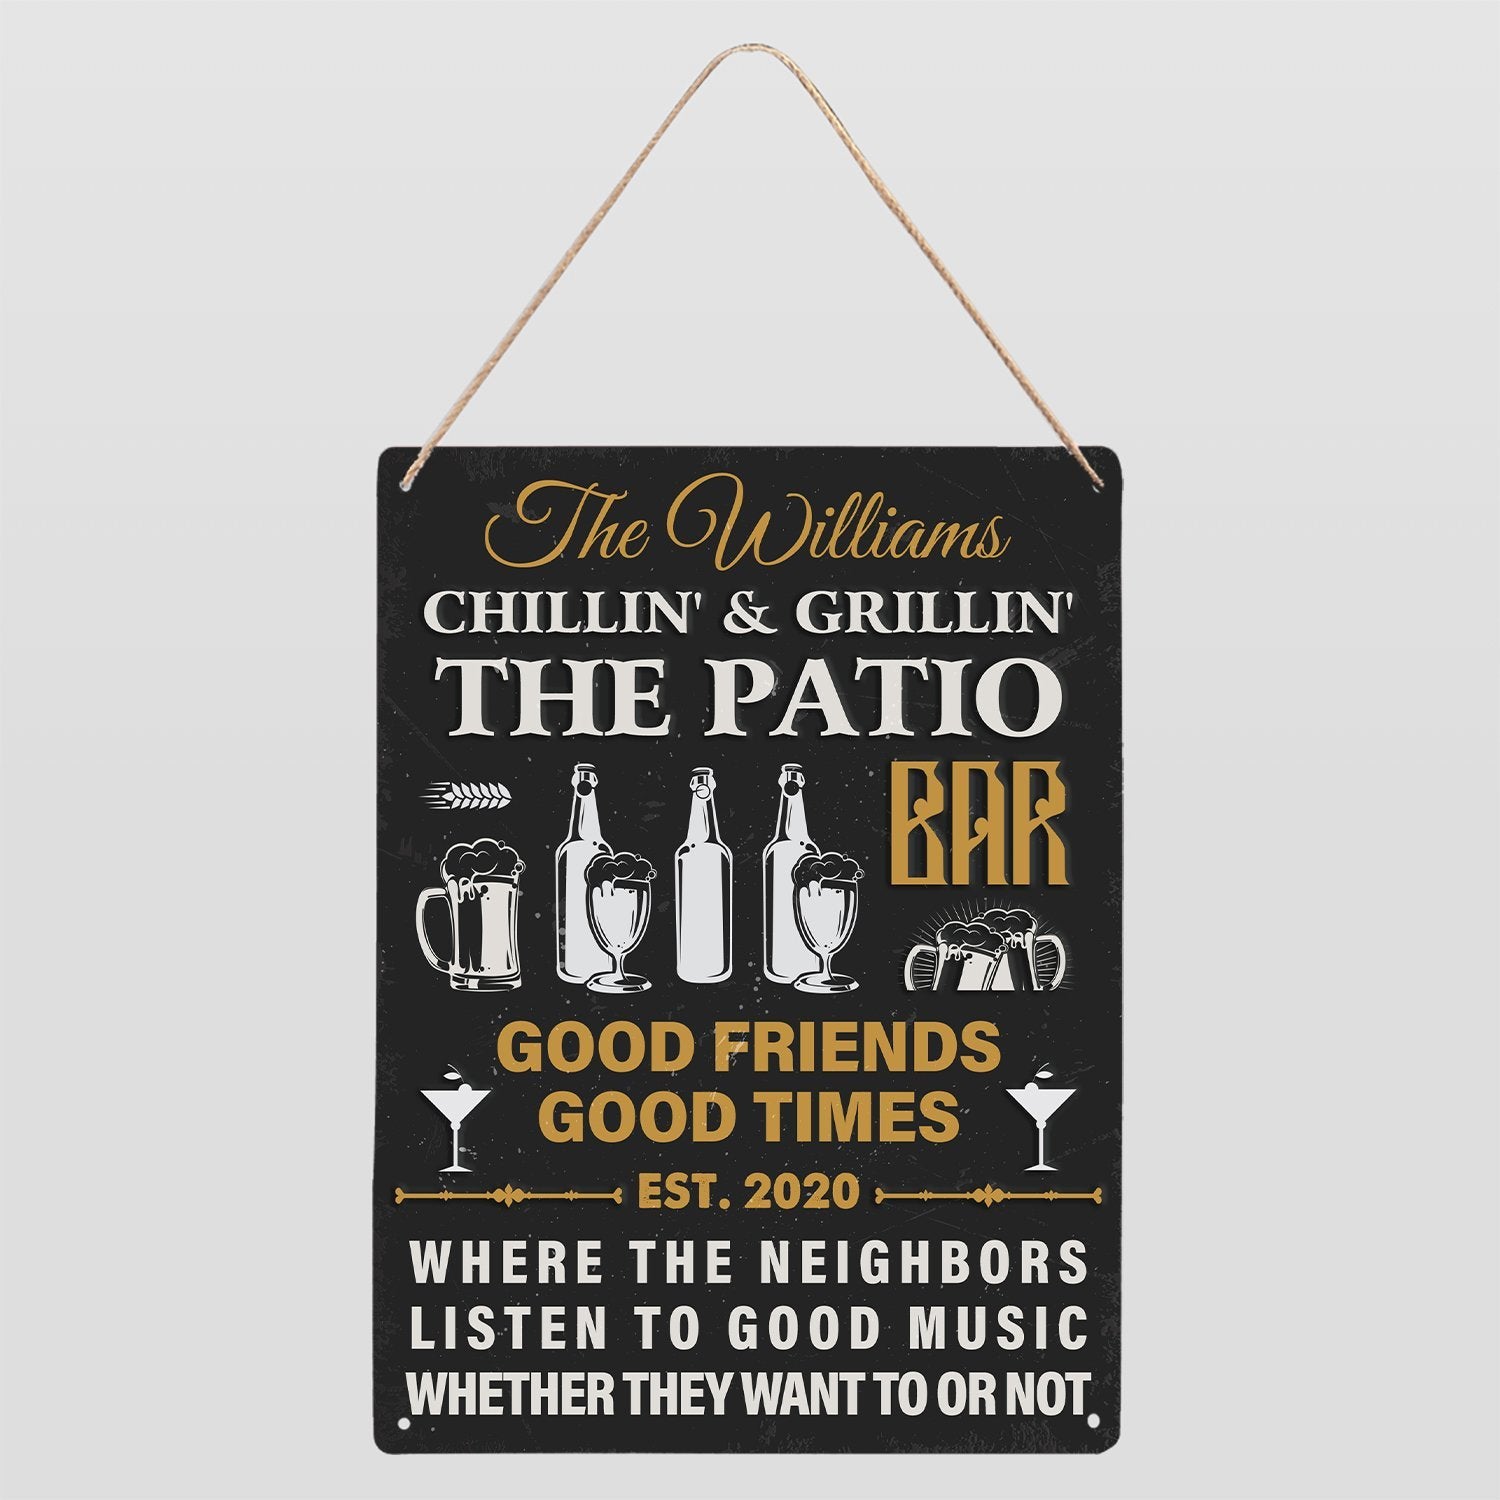 Customized Metal Sign, Chillin' And Grillin' The Patio Bar Good Friends Good Times